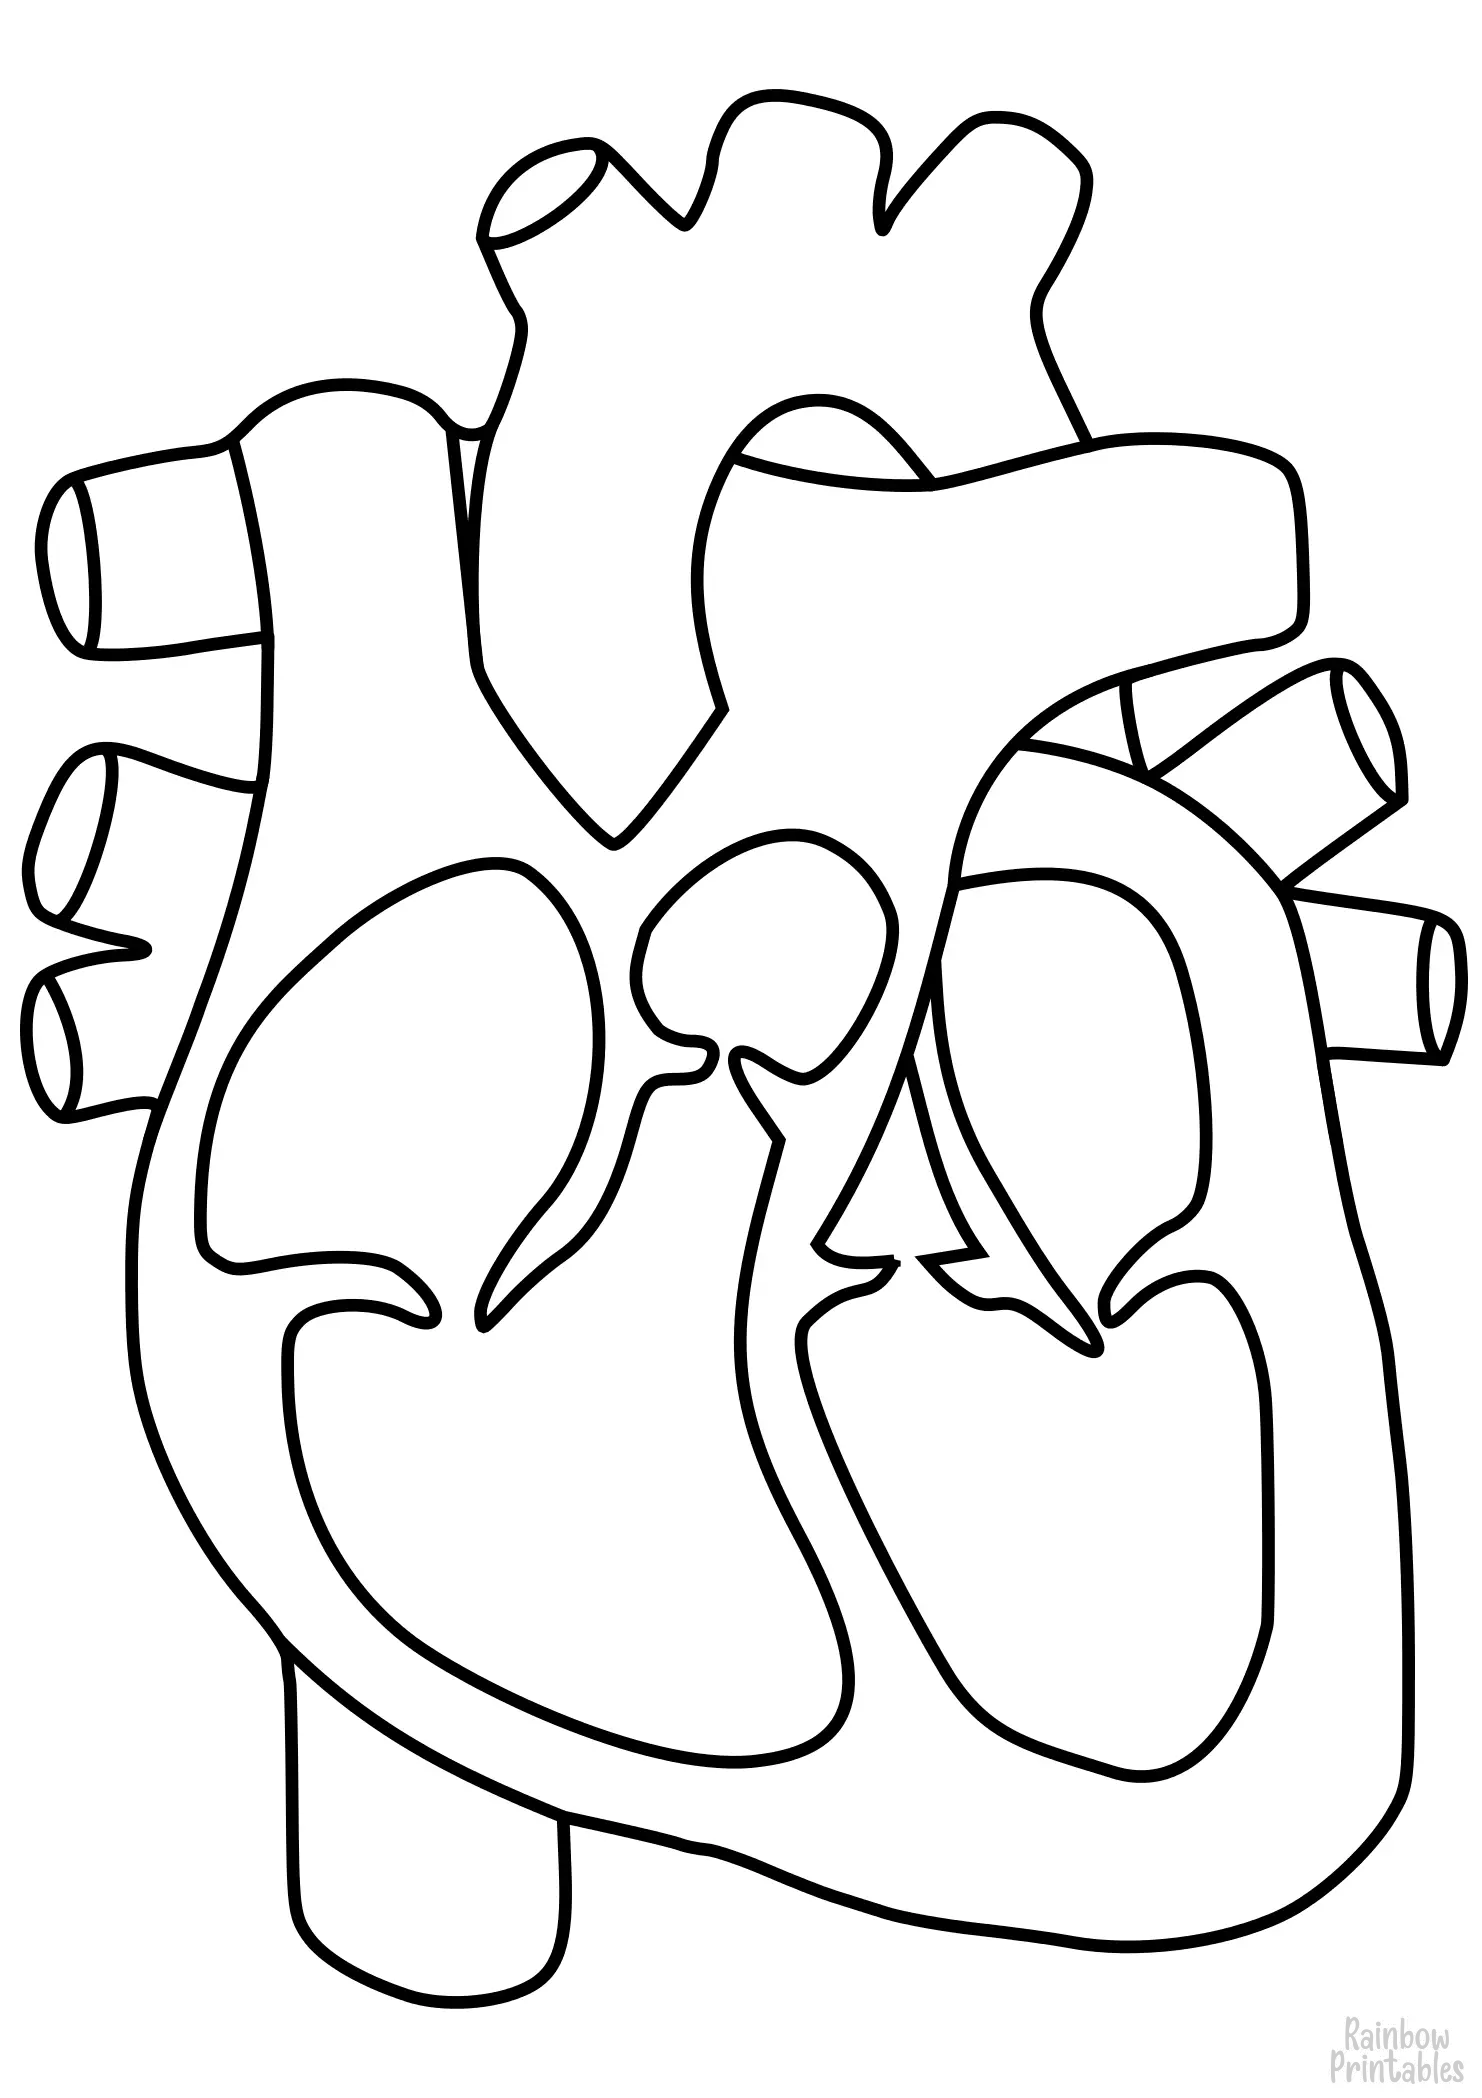 human-Drawing-HEART-coloring-page HUMAN Anatomy Health Medical Activity For Kids Freebie